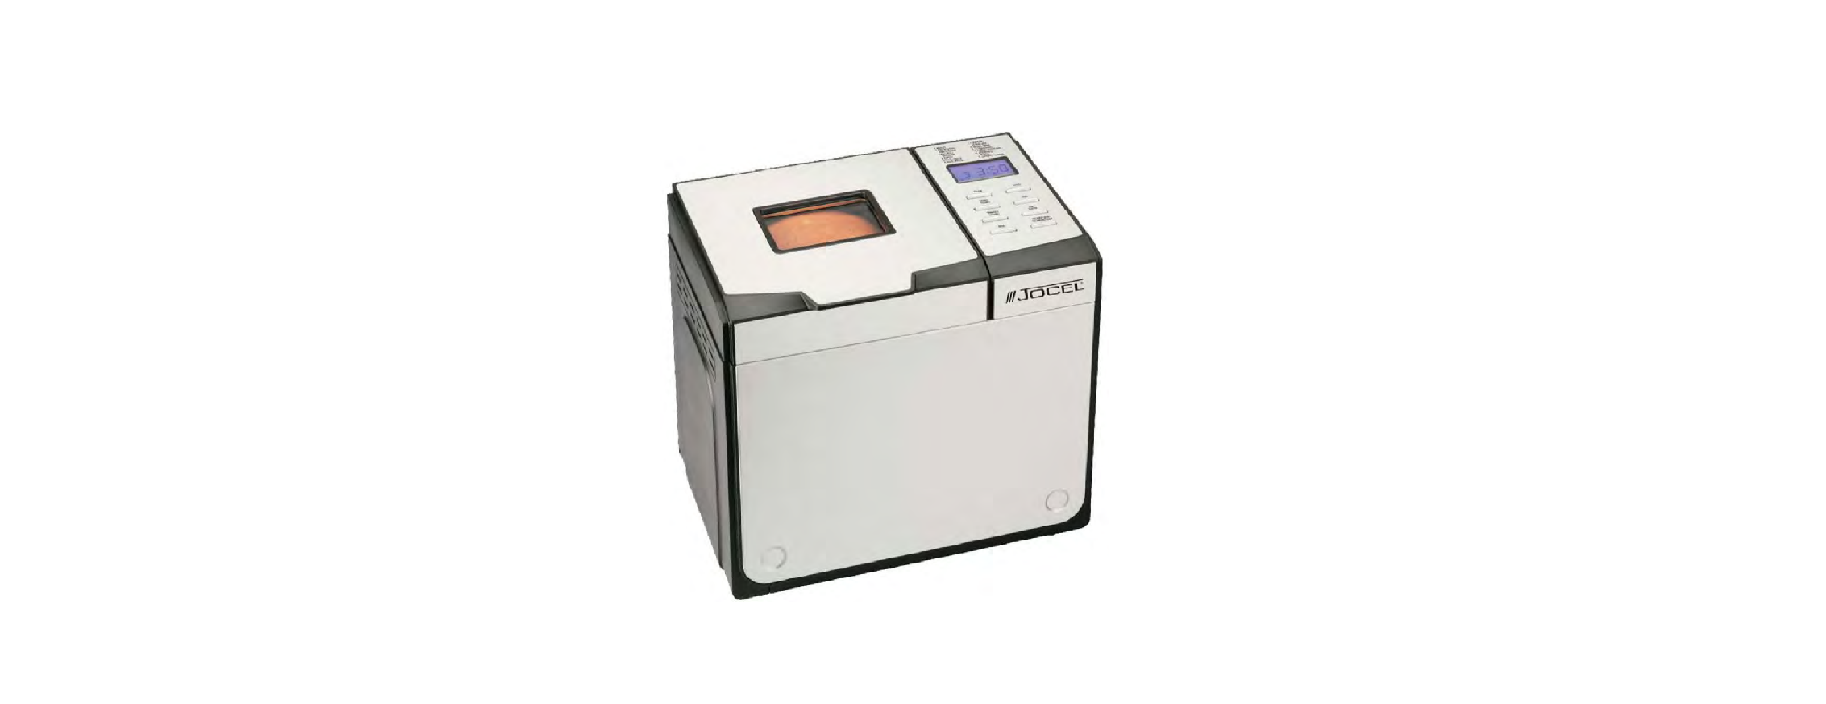 You are currently viewing jocel BM1309-B BREAD MAKER User Manual